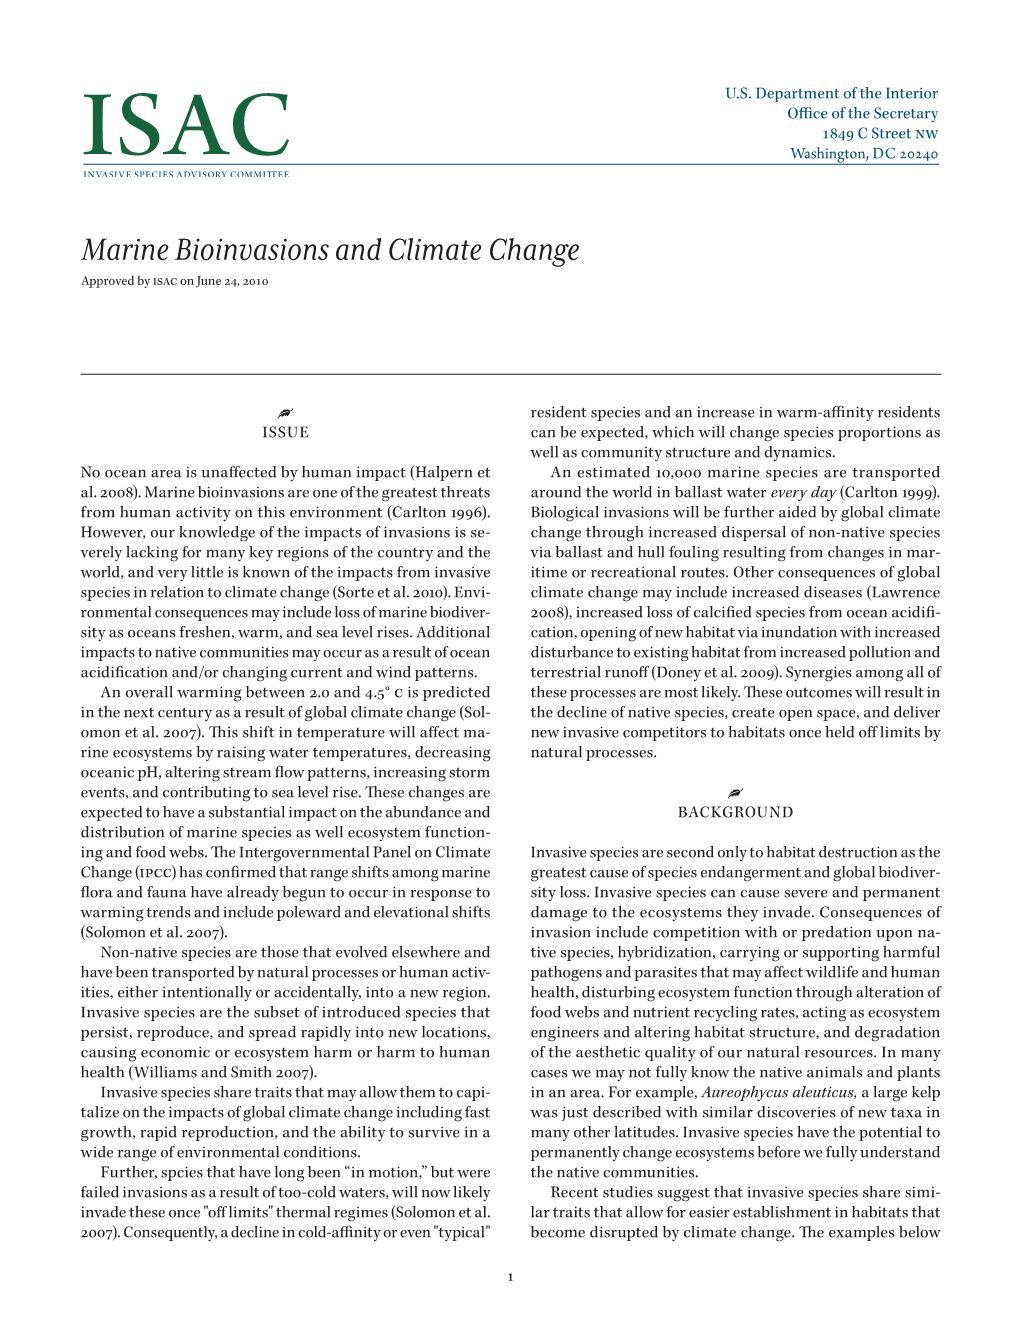 Marine Bioinvasions and Climate Change Approved by Isac on June 24, 2010